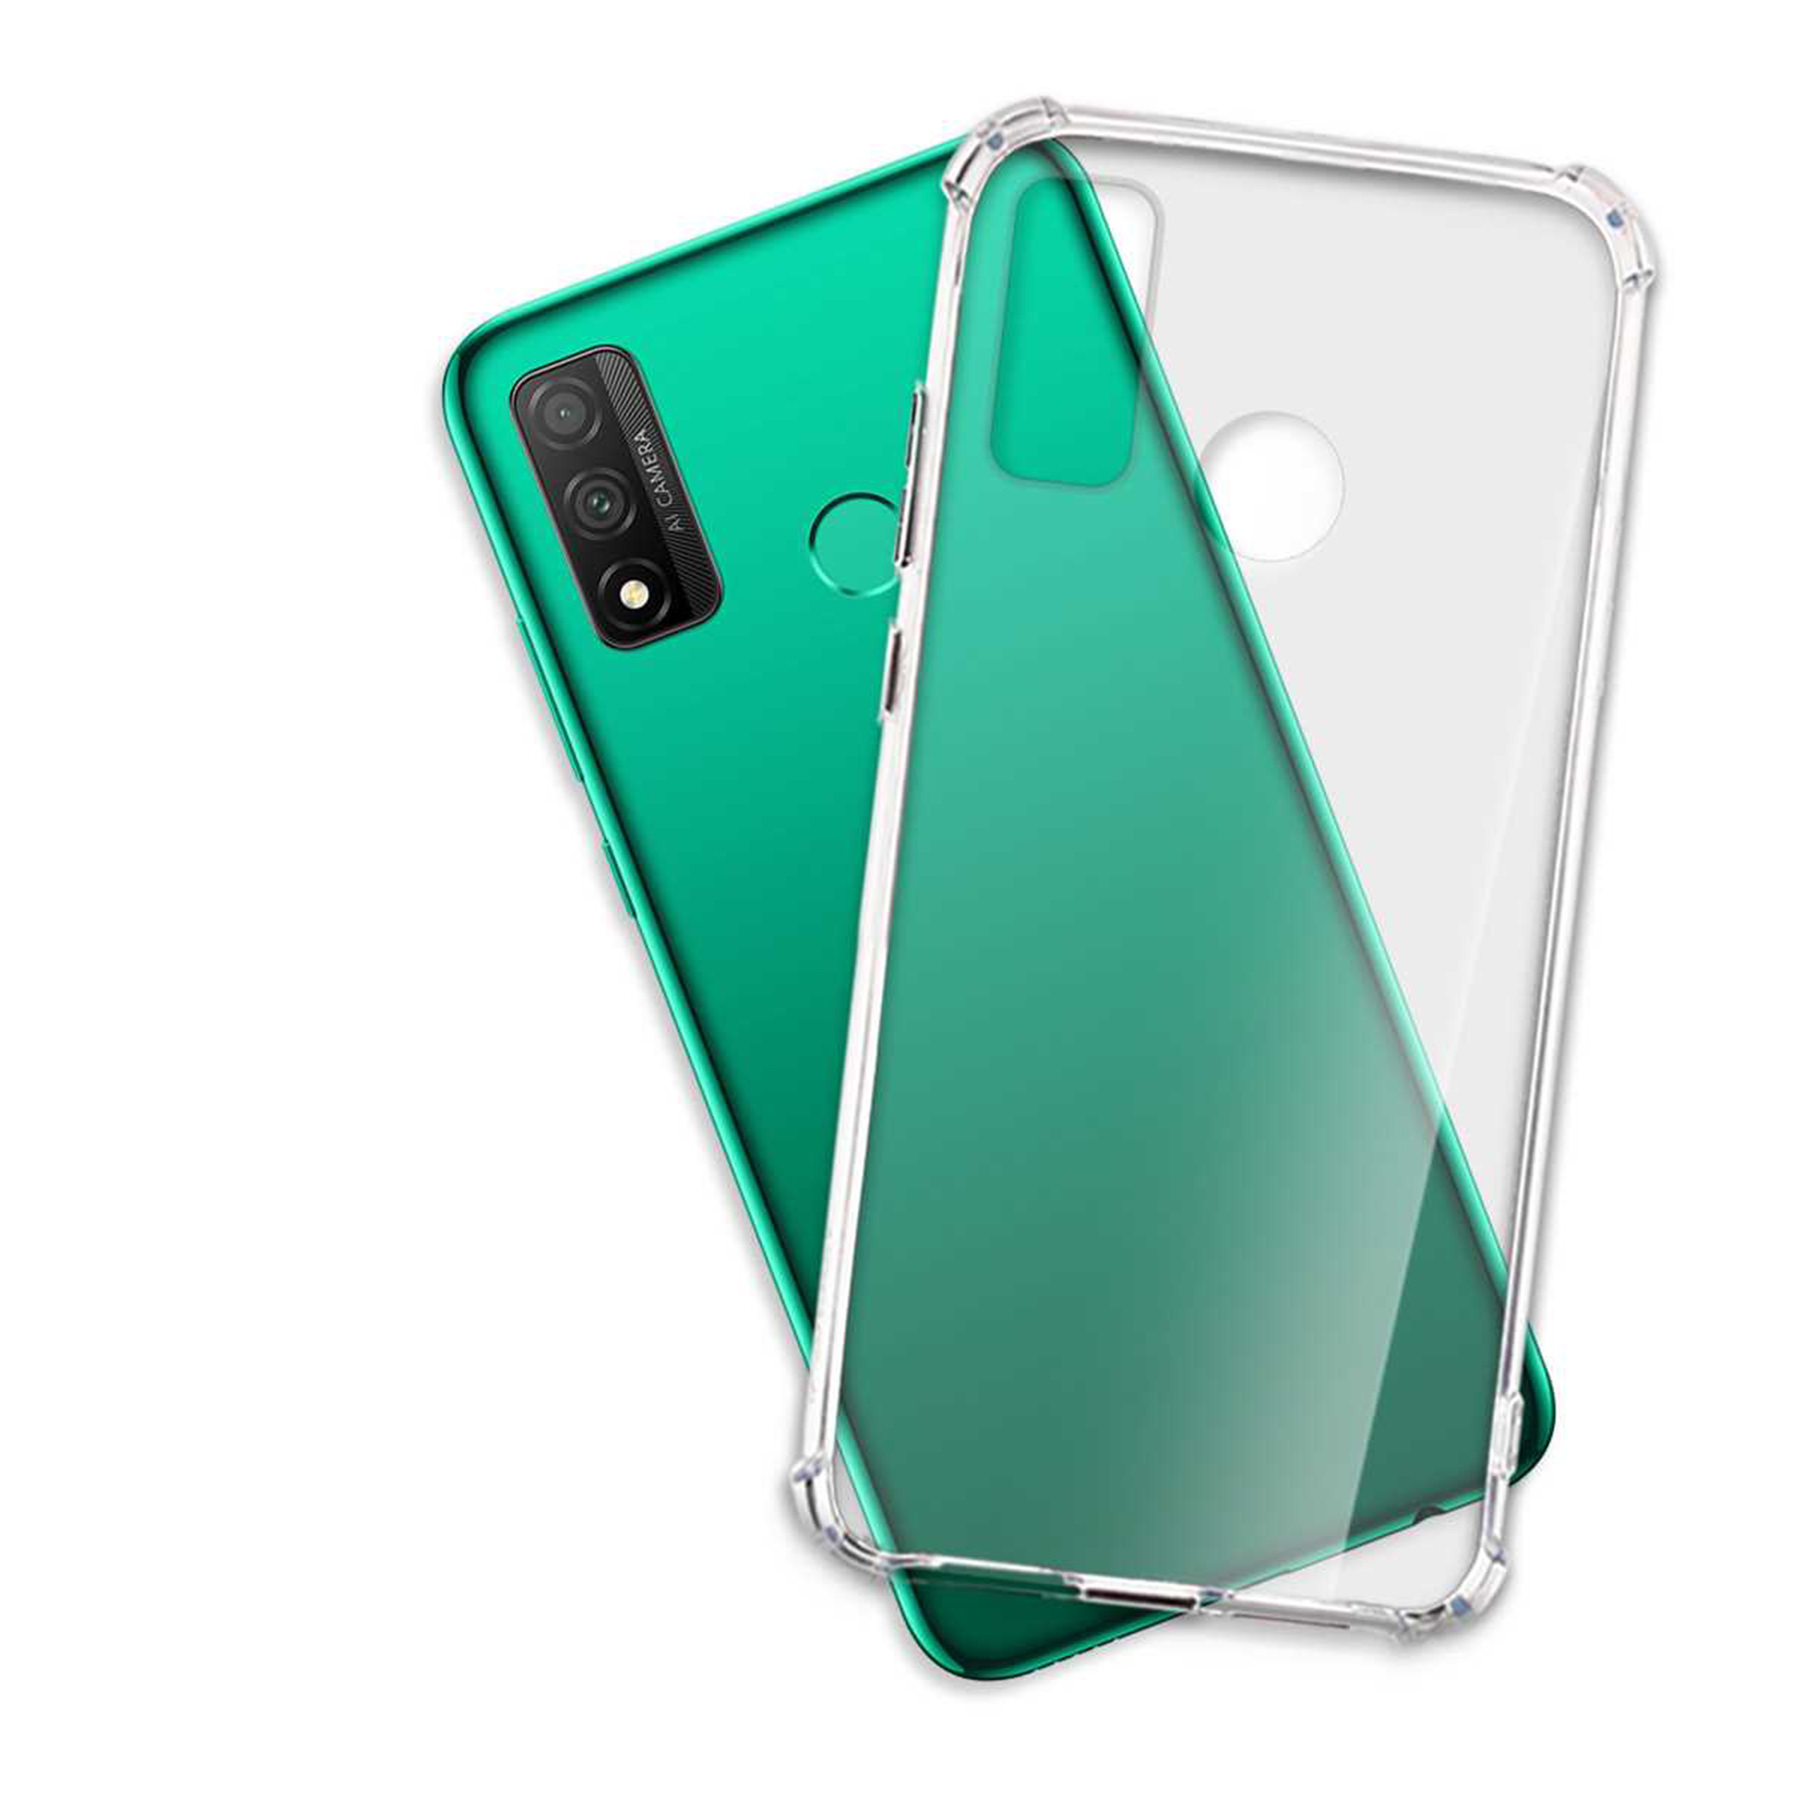 ENERGY Smart Backcover, MORE Huawei, P Clear Armor 2020, Transparent MTB Case,